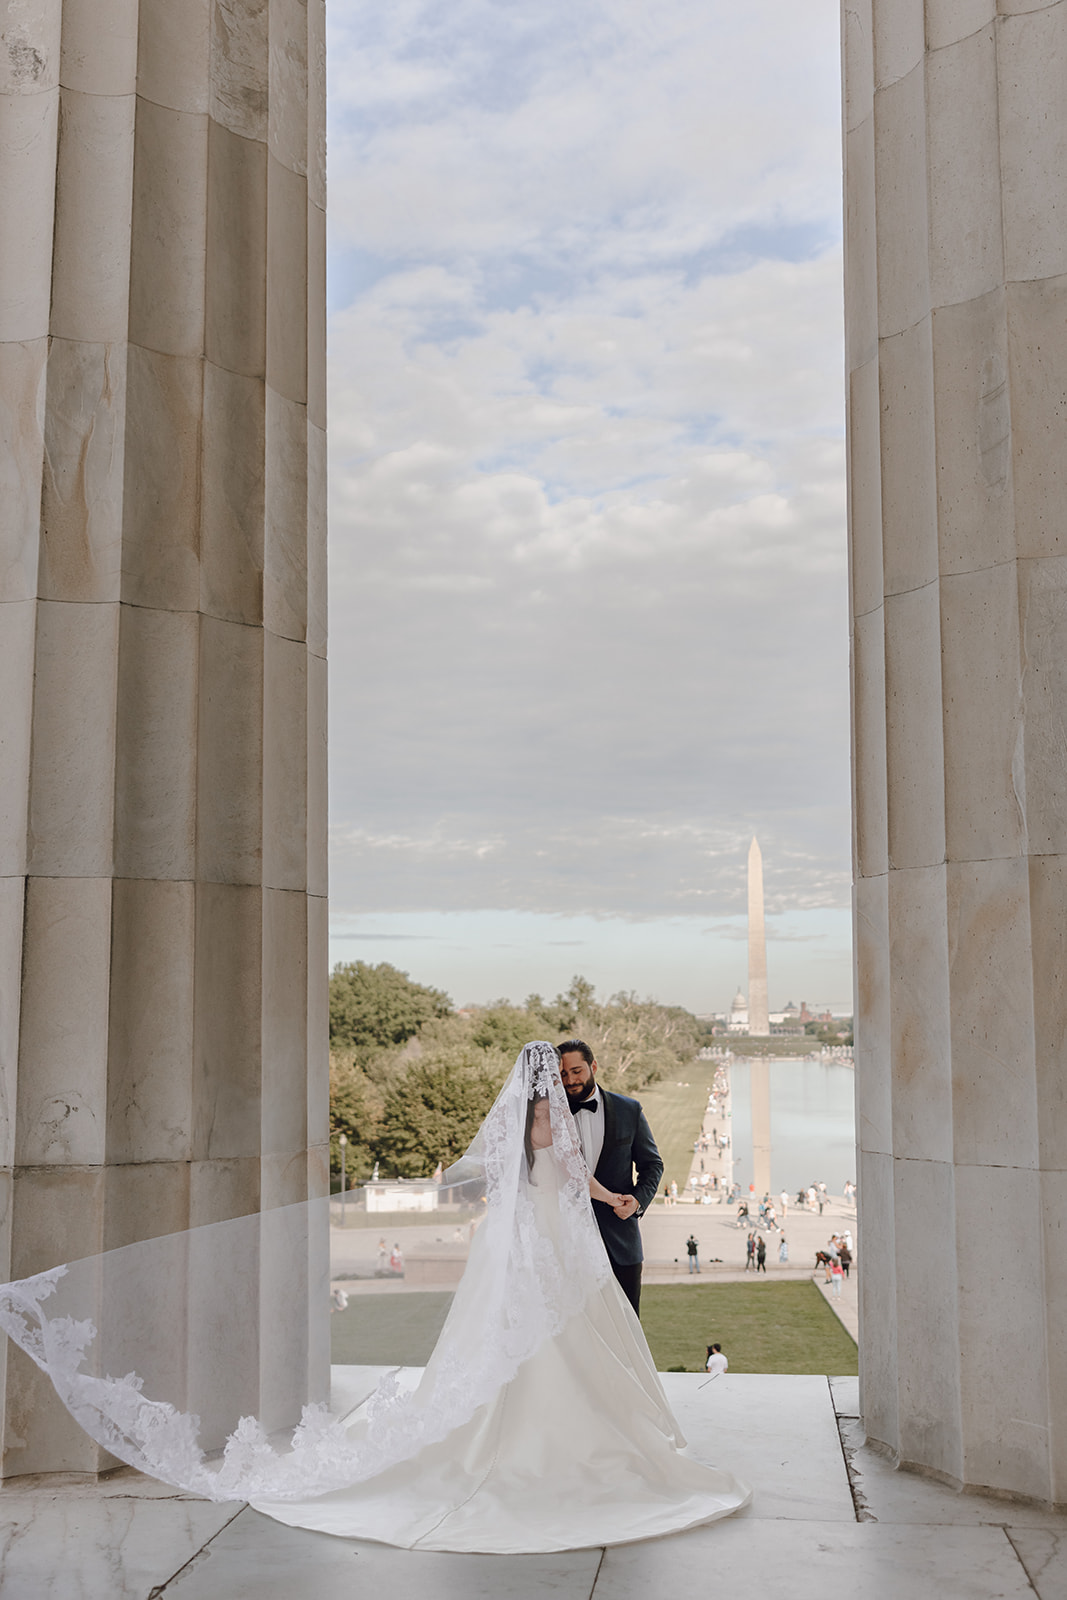 the bride and groom standing together at Washington DC with her veil flowing in the wind